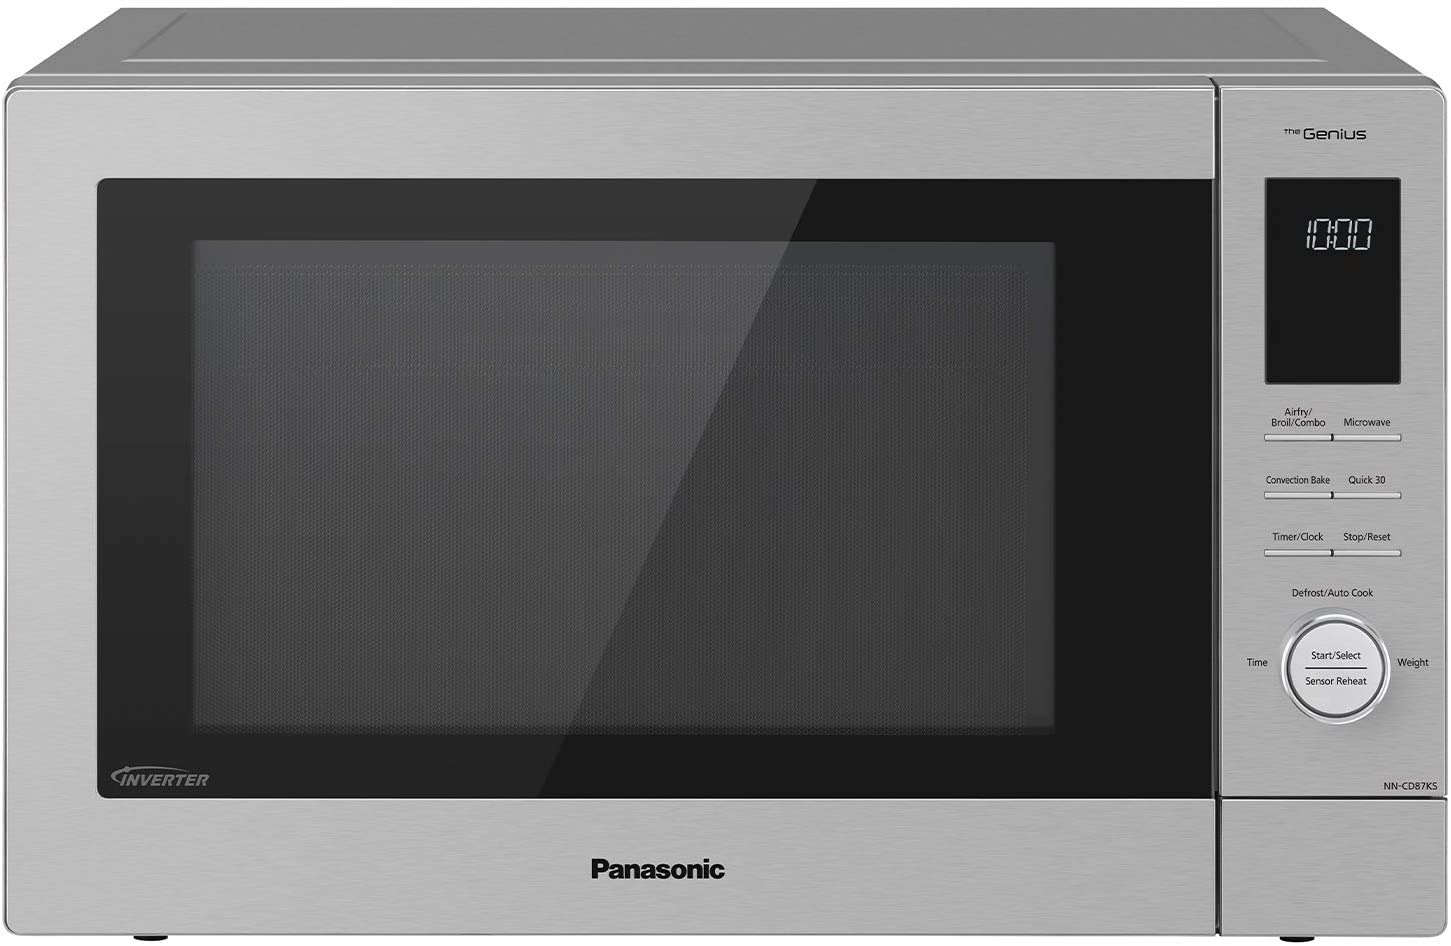 Panasonic HomeChef 4-in-1 Microwave Oven with Air Fryer, Convection Bake, FlashXpress Broiler, Inverter Microwave Technology, 1000W, 1.2 cu ft with Easy Clean Interior - NN-CD87KS (Stainless Steel) 4 in 1 Microwave